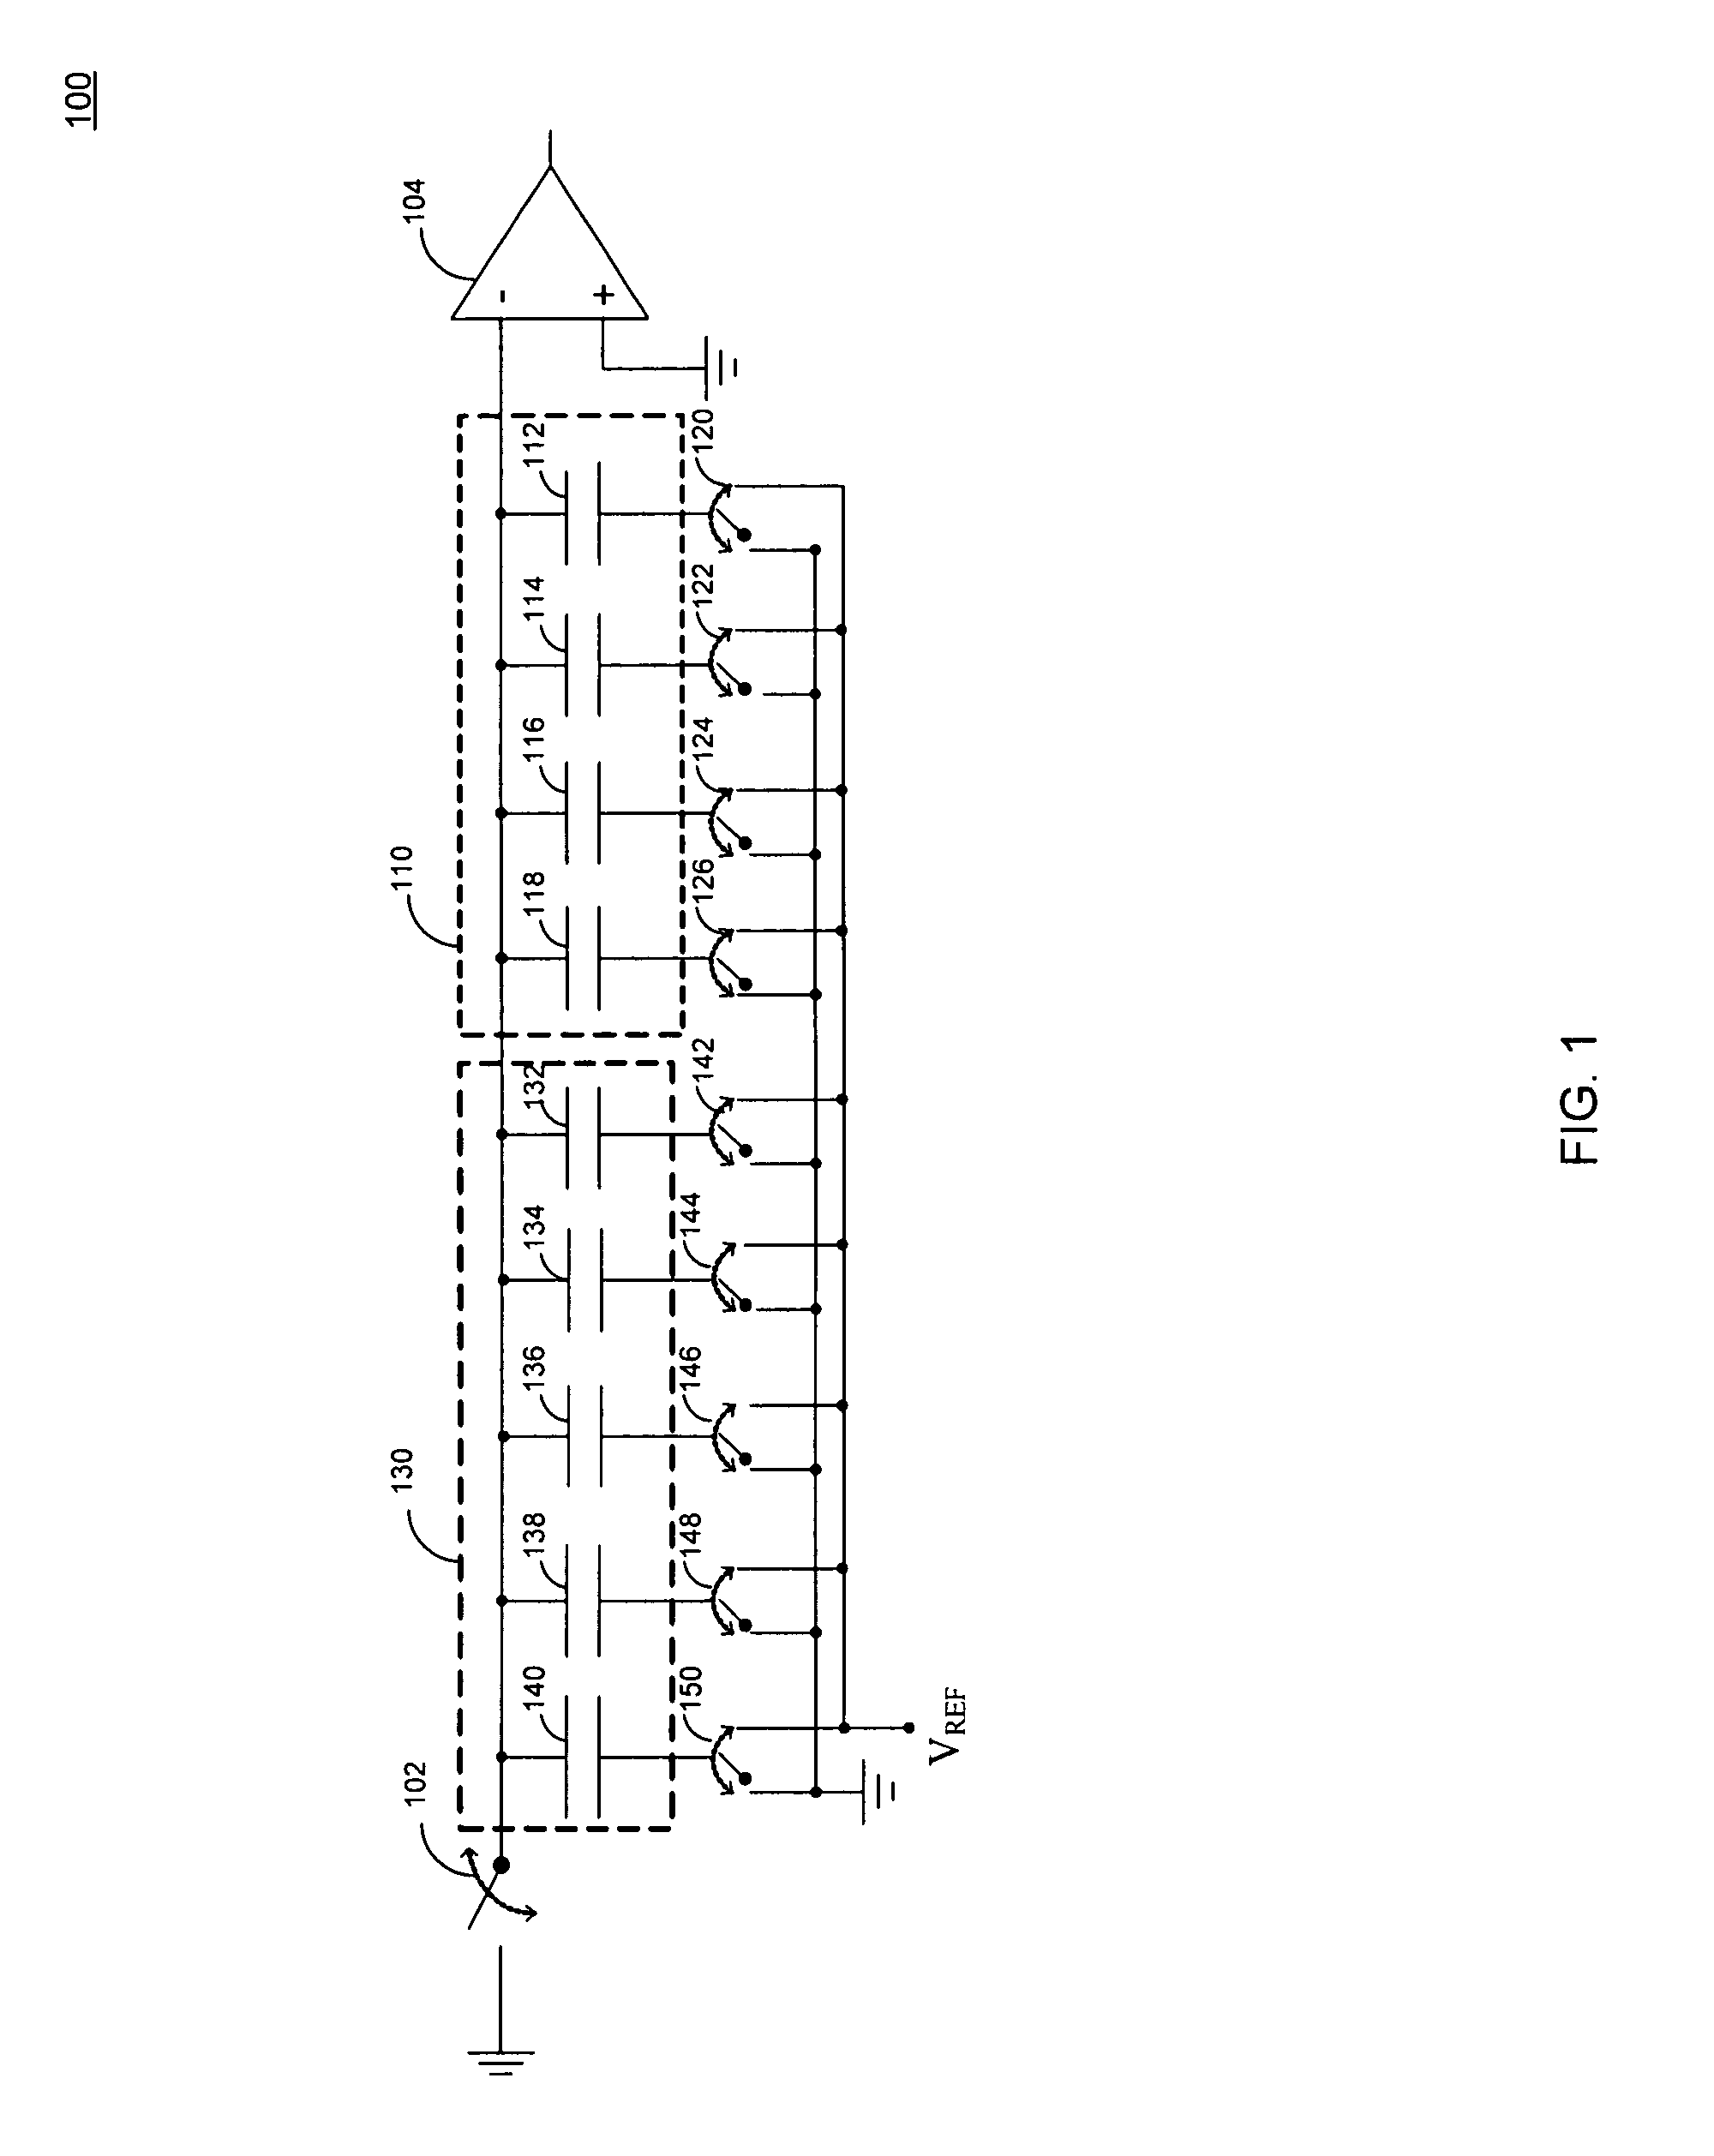 Systems and methods for characterizing component ratios and generating a digital representation of same